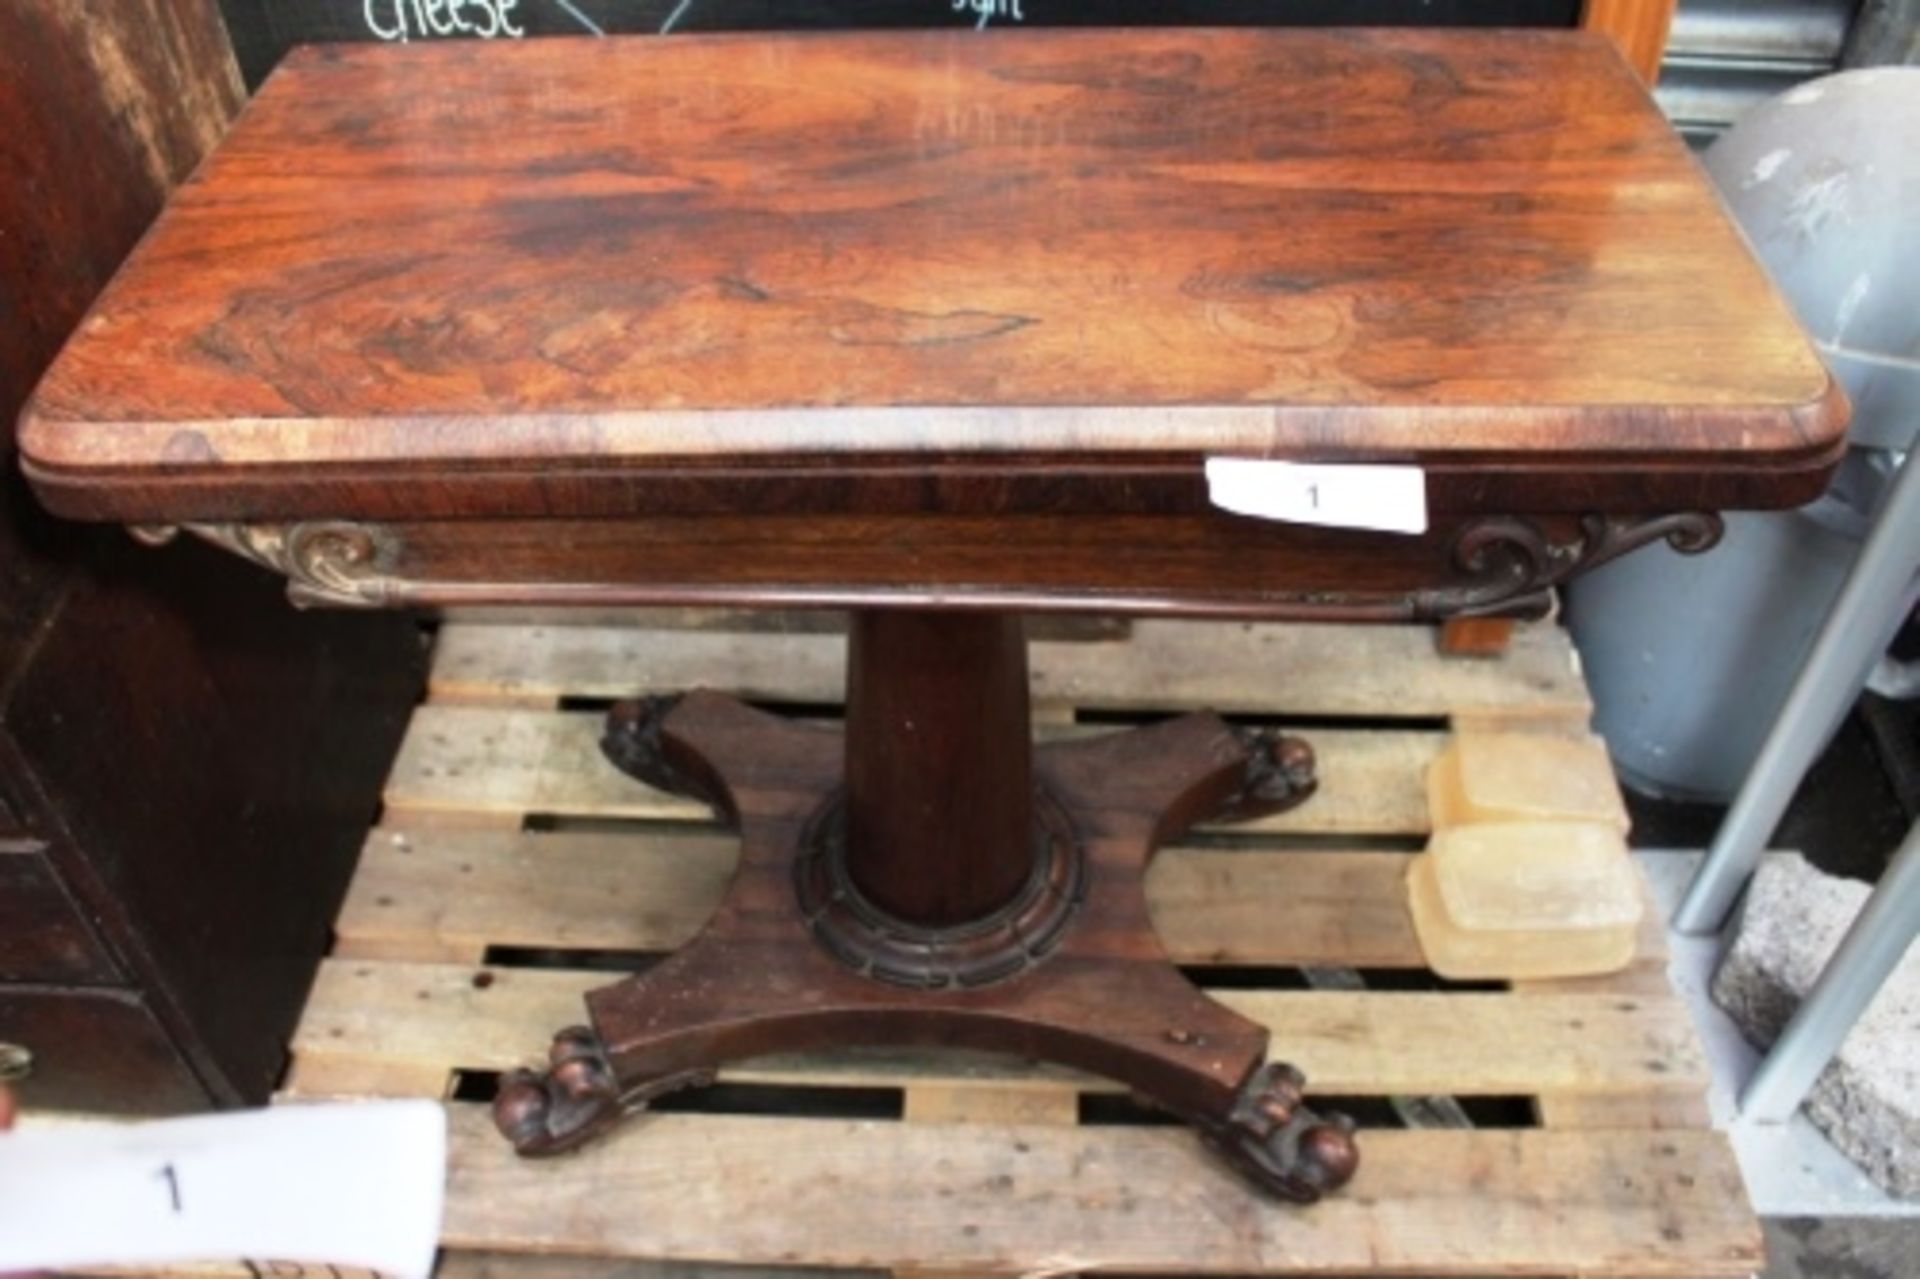 Early 19th Century English rosewood fold-over top card table, 36" square, 29" high - Second-hand (